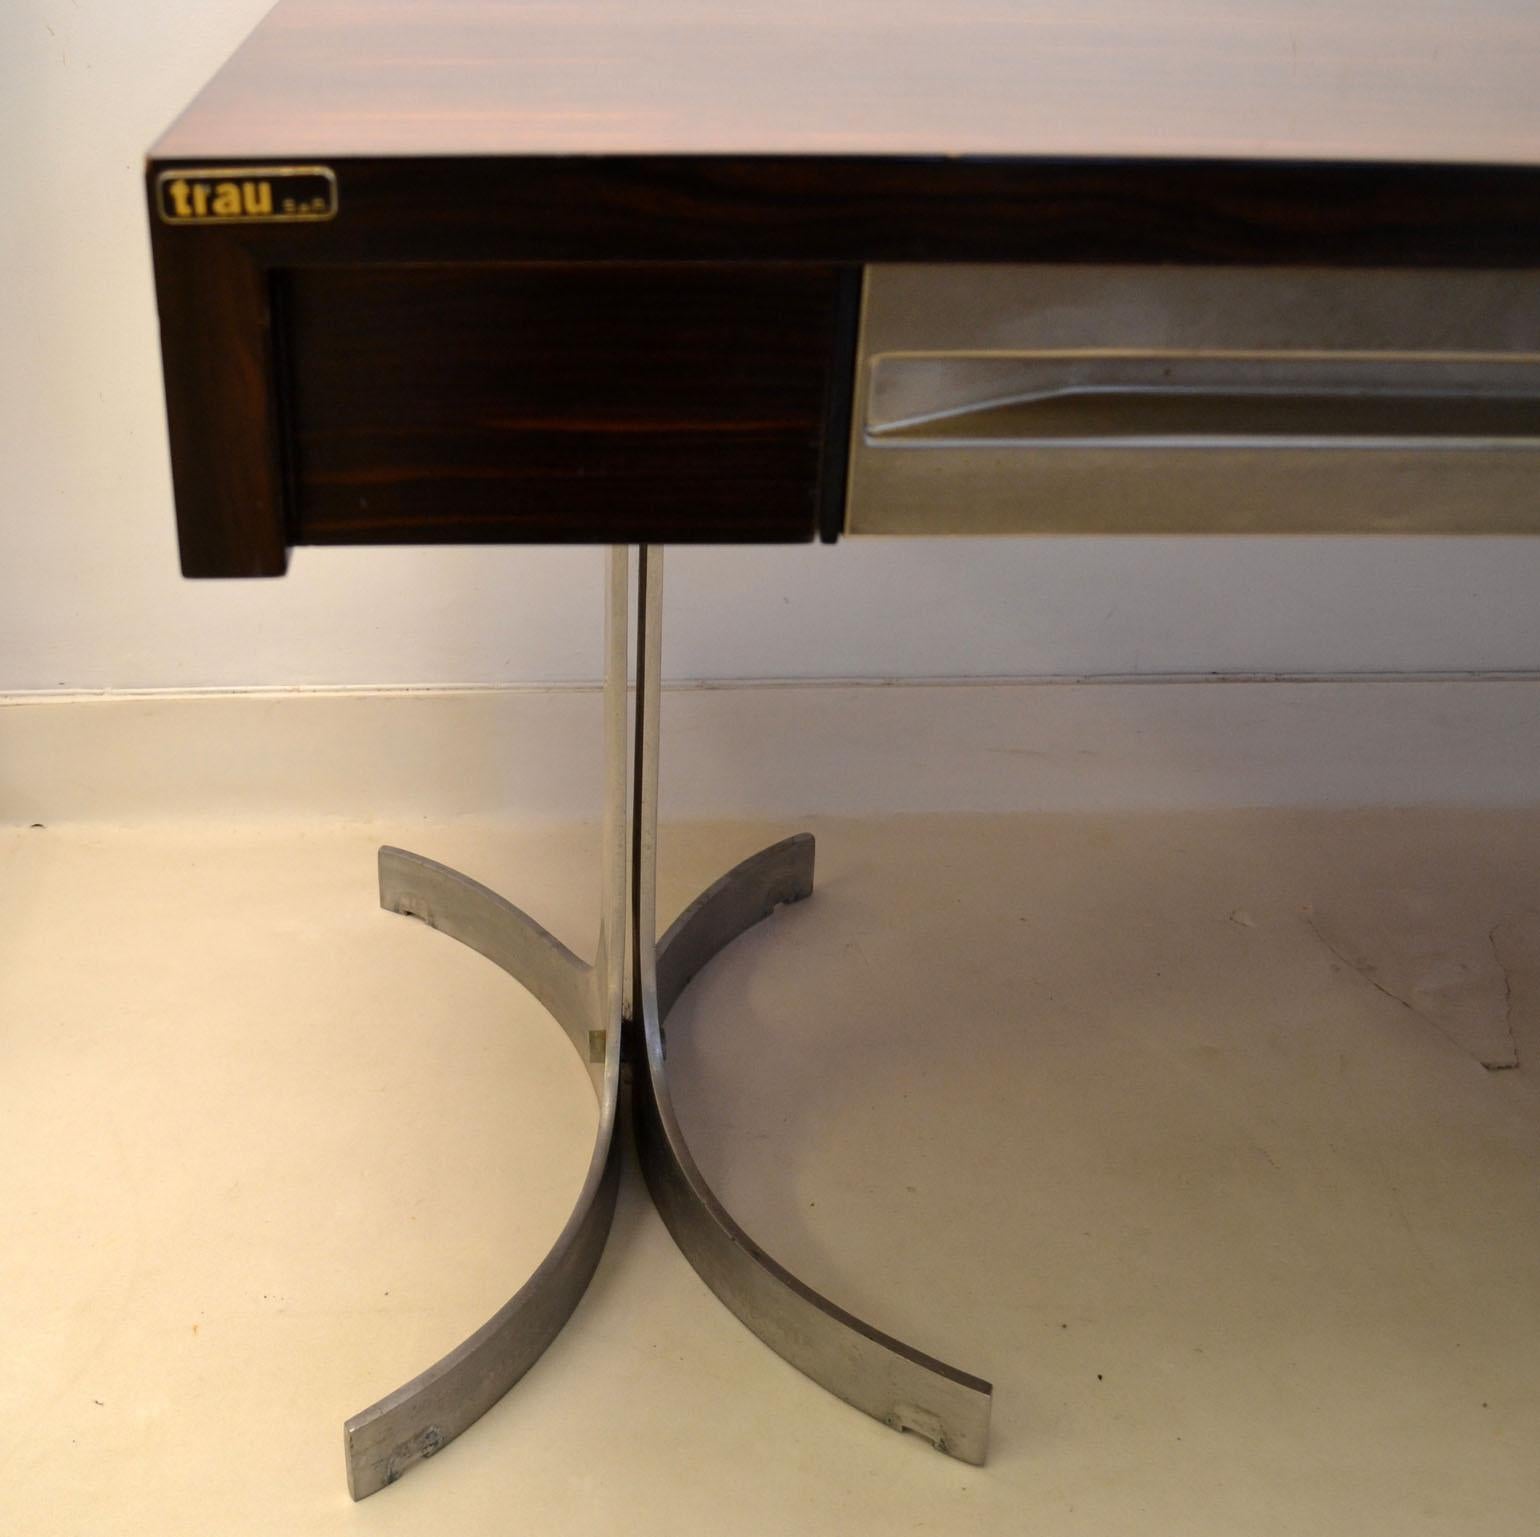 Mid-Century Modern Large Executive Desk by Trau, Italian 1960s, Wooden Top on Curved Metal Legs